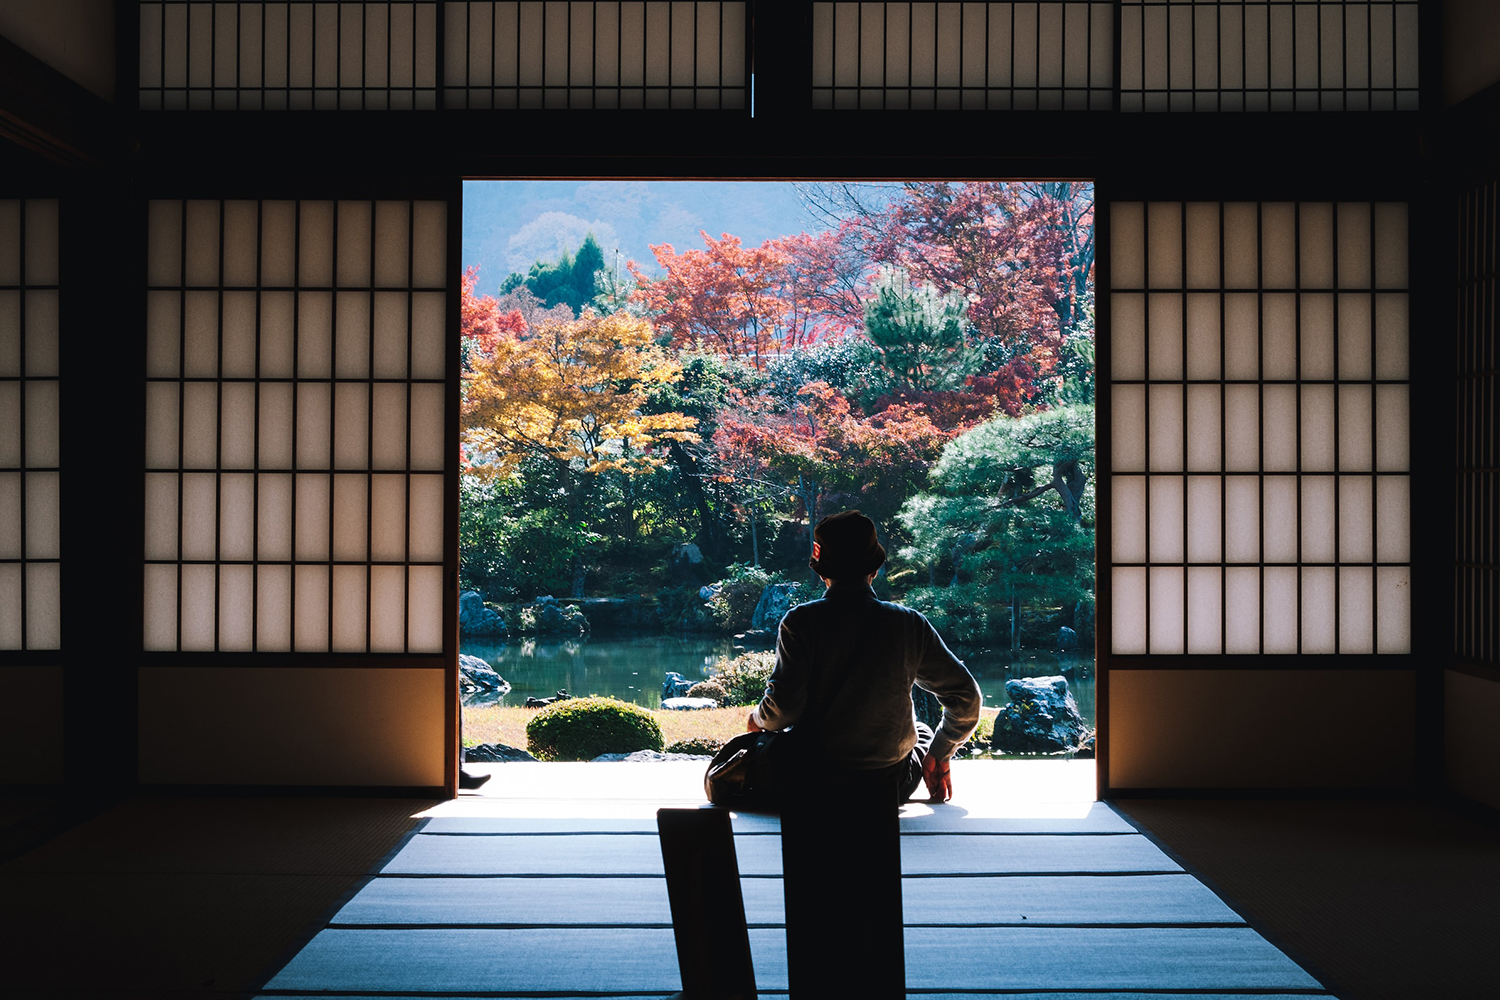 A man looking out of a window with trees in the distance